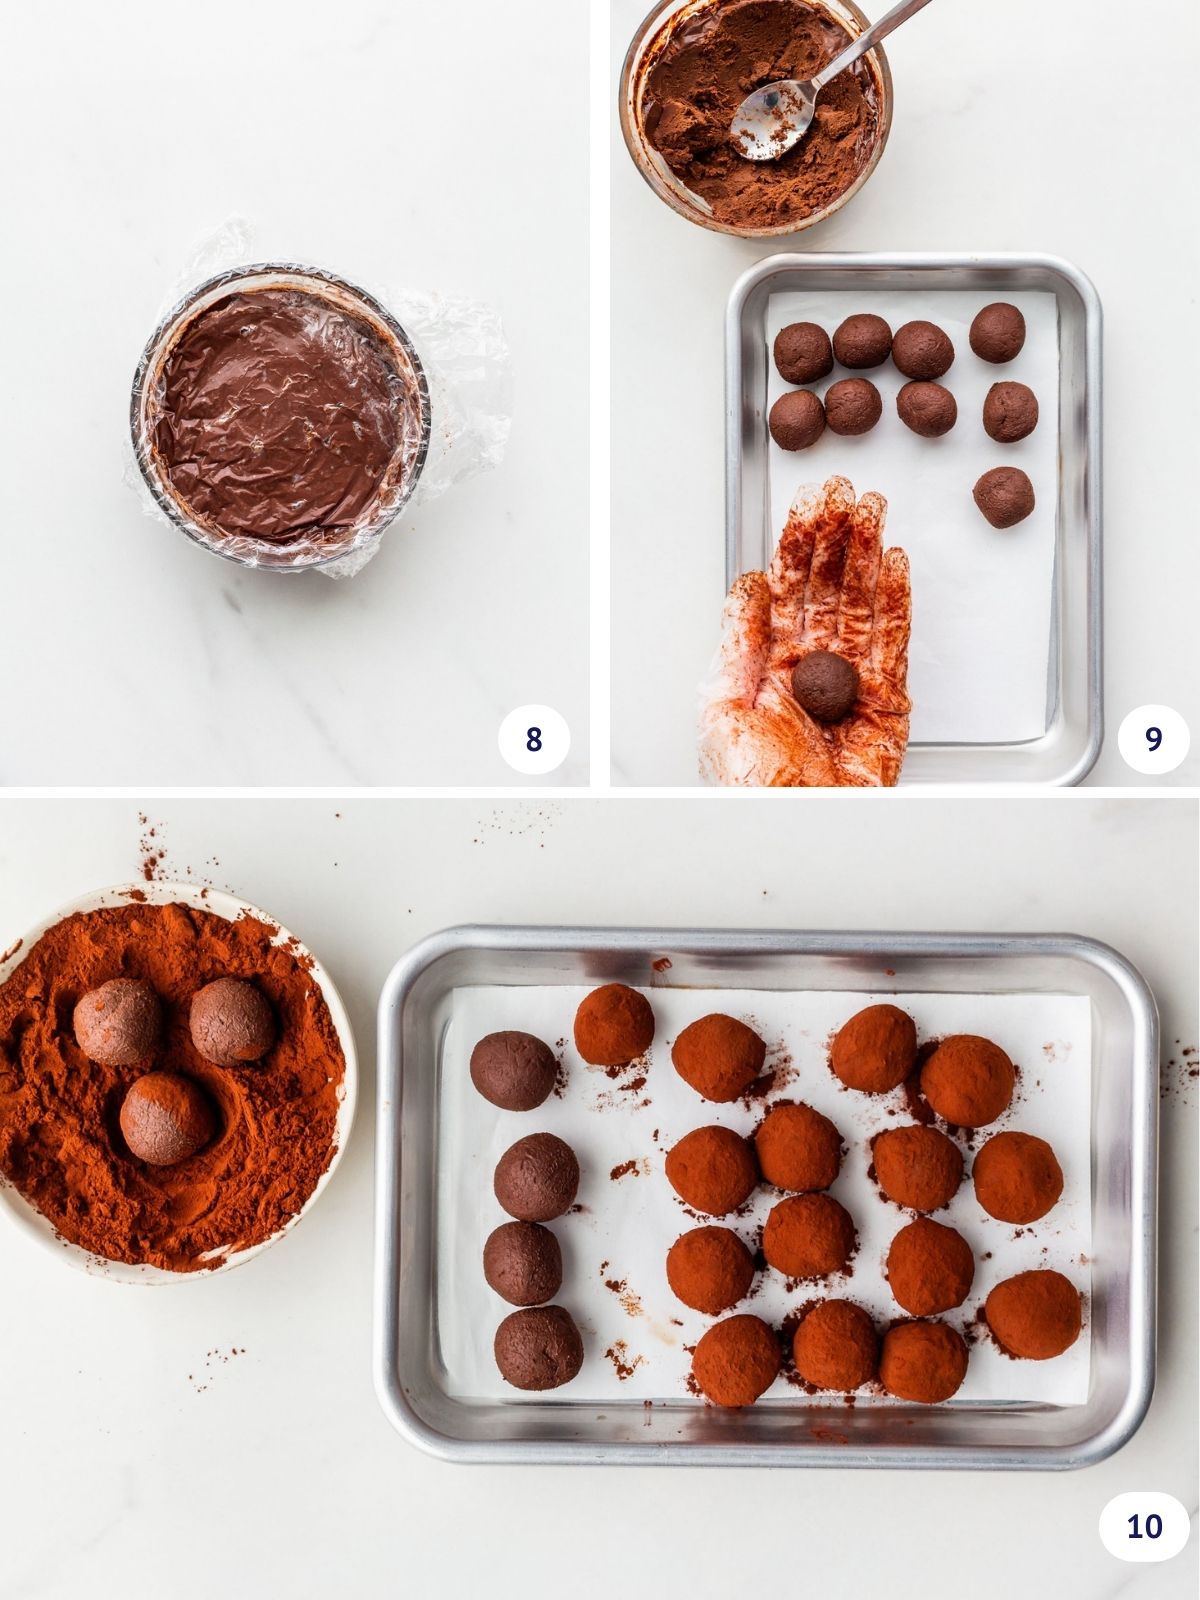 Rolling chilled ganache into balls and coating in cocoa powder to make homemade truffles.